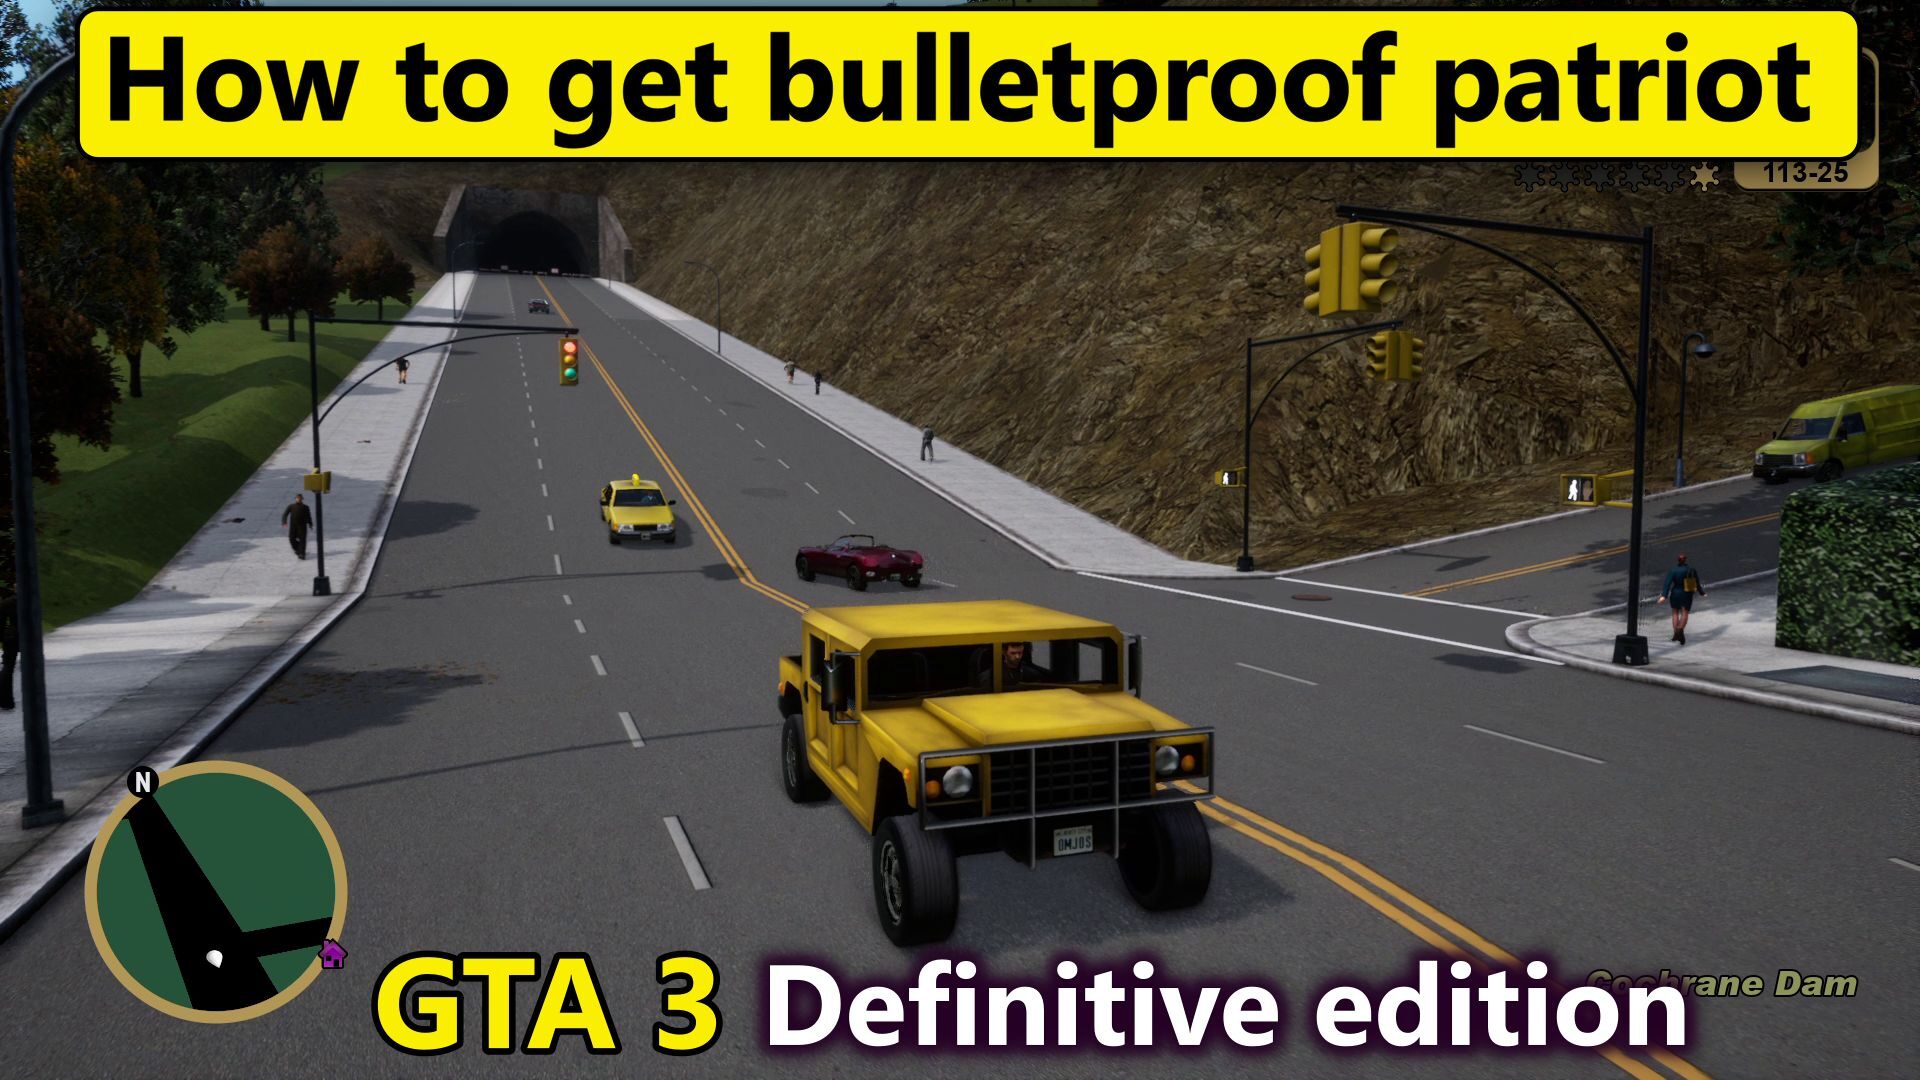 How to get bulletproof patriot in GTA 3 definitive edition